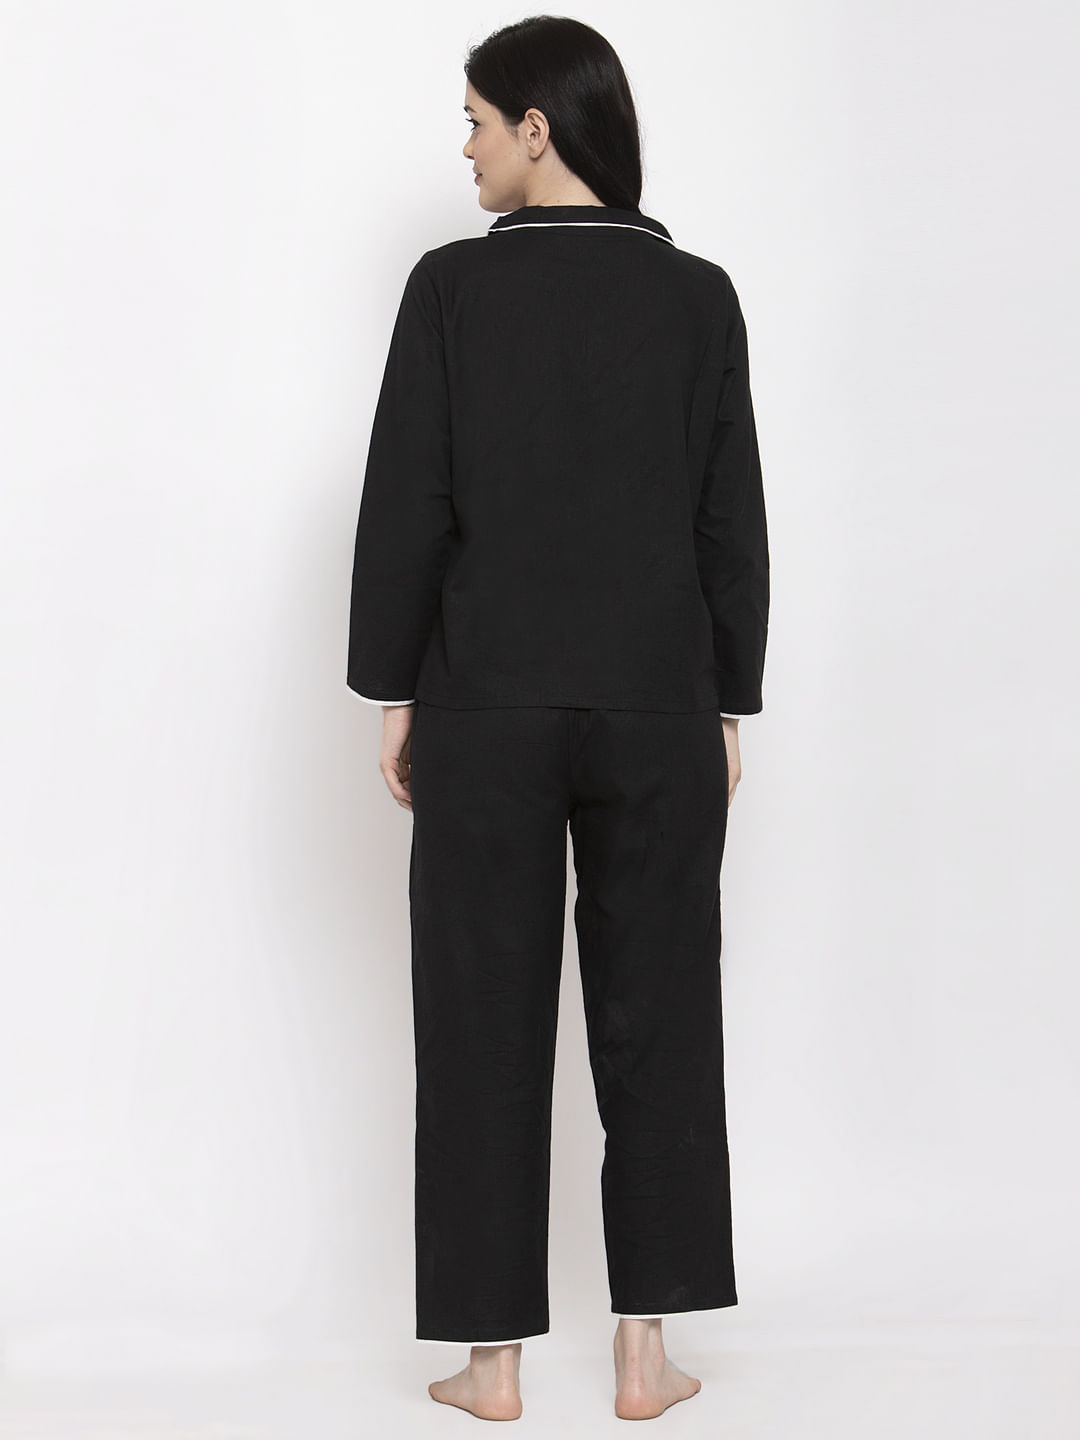 Black Cotton Solid Nightsuit